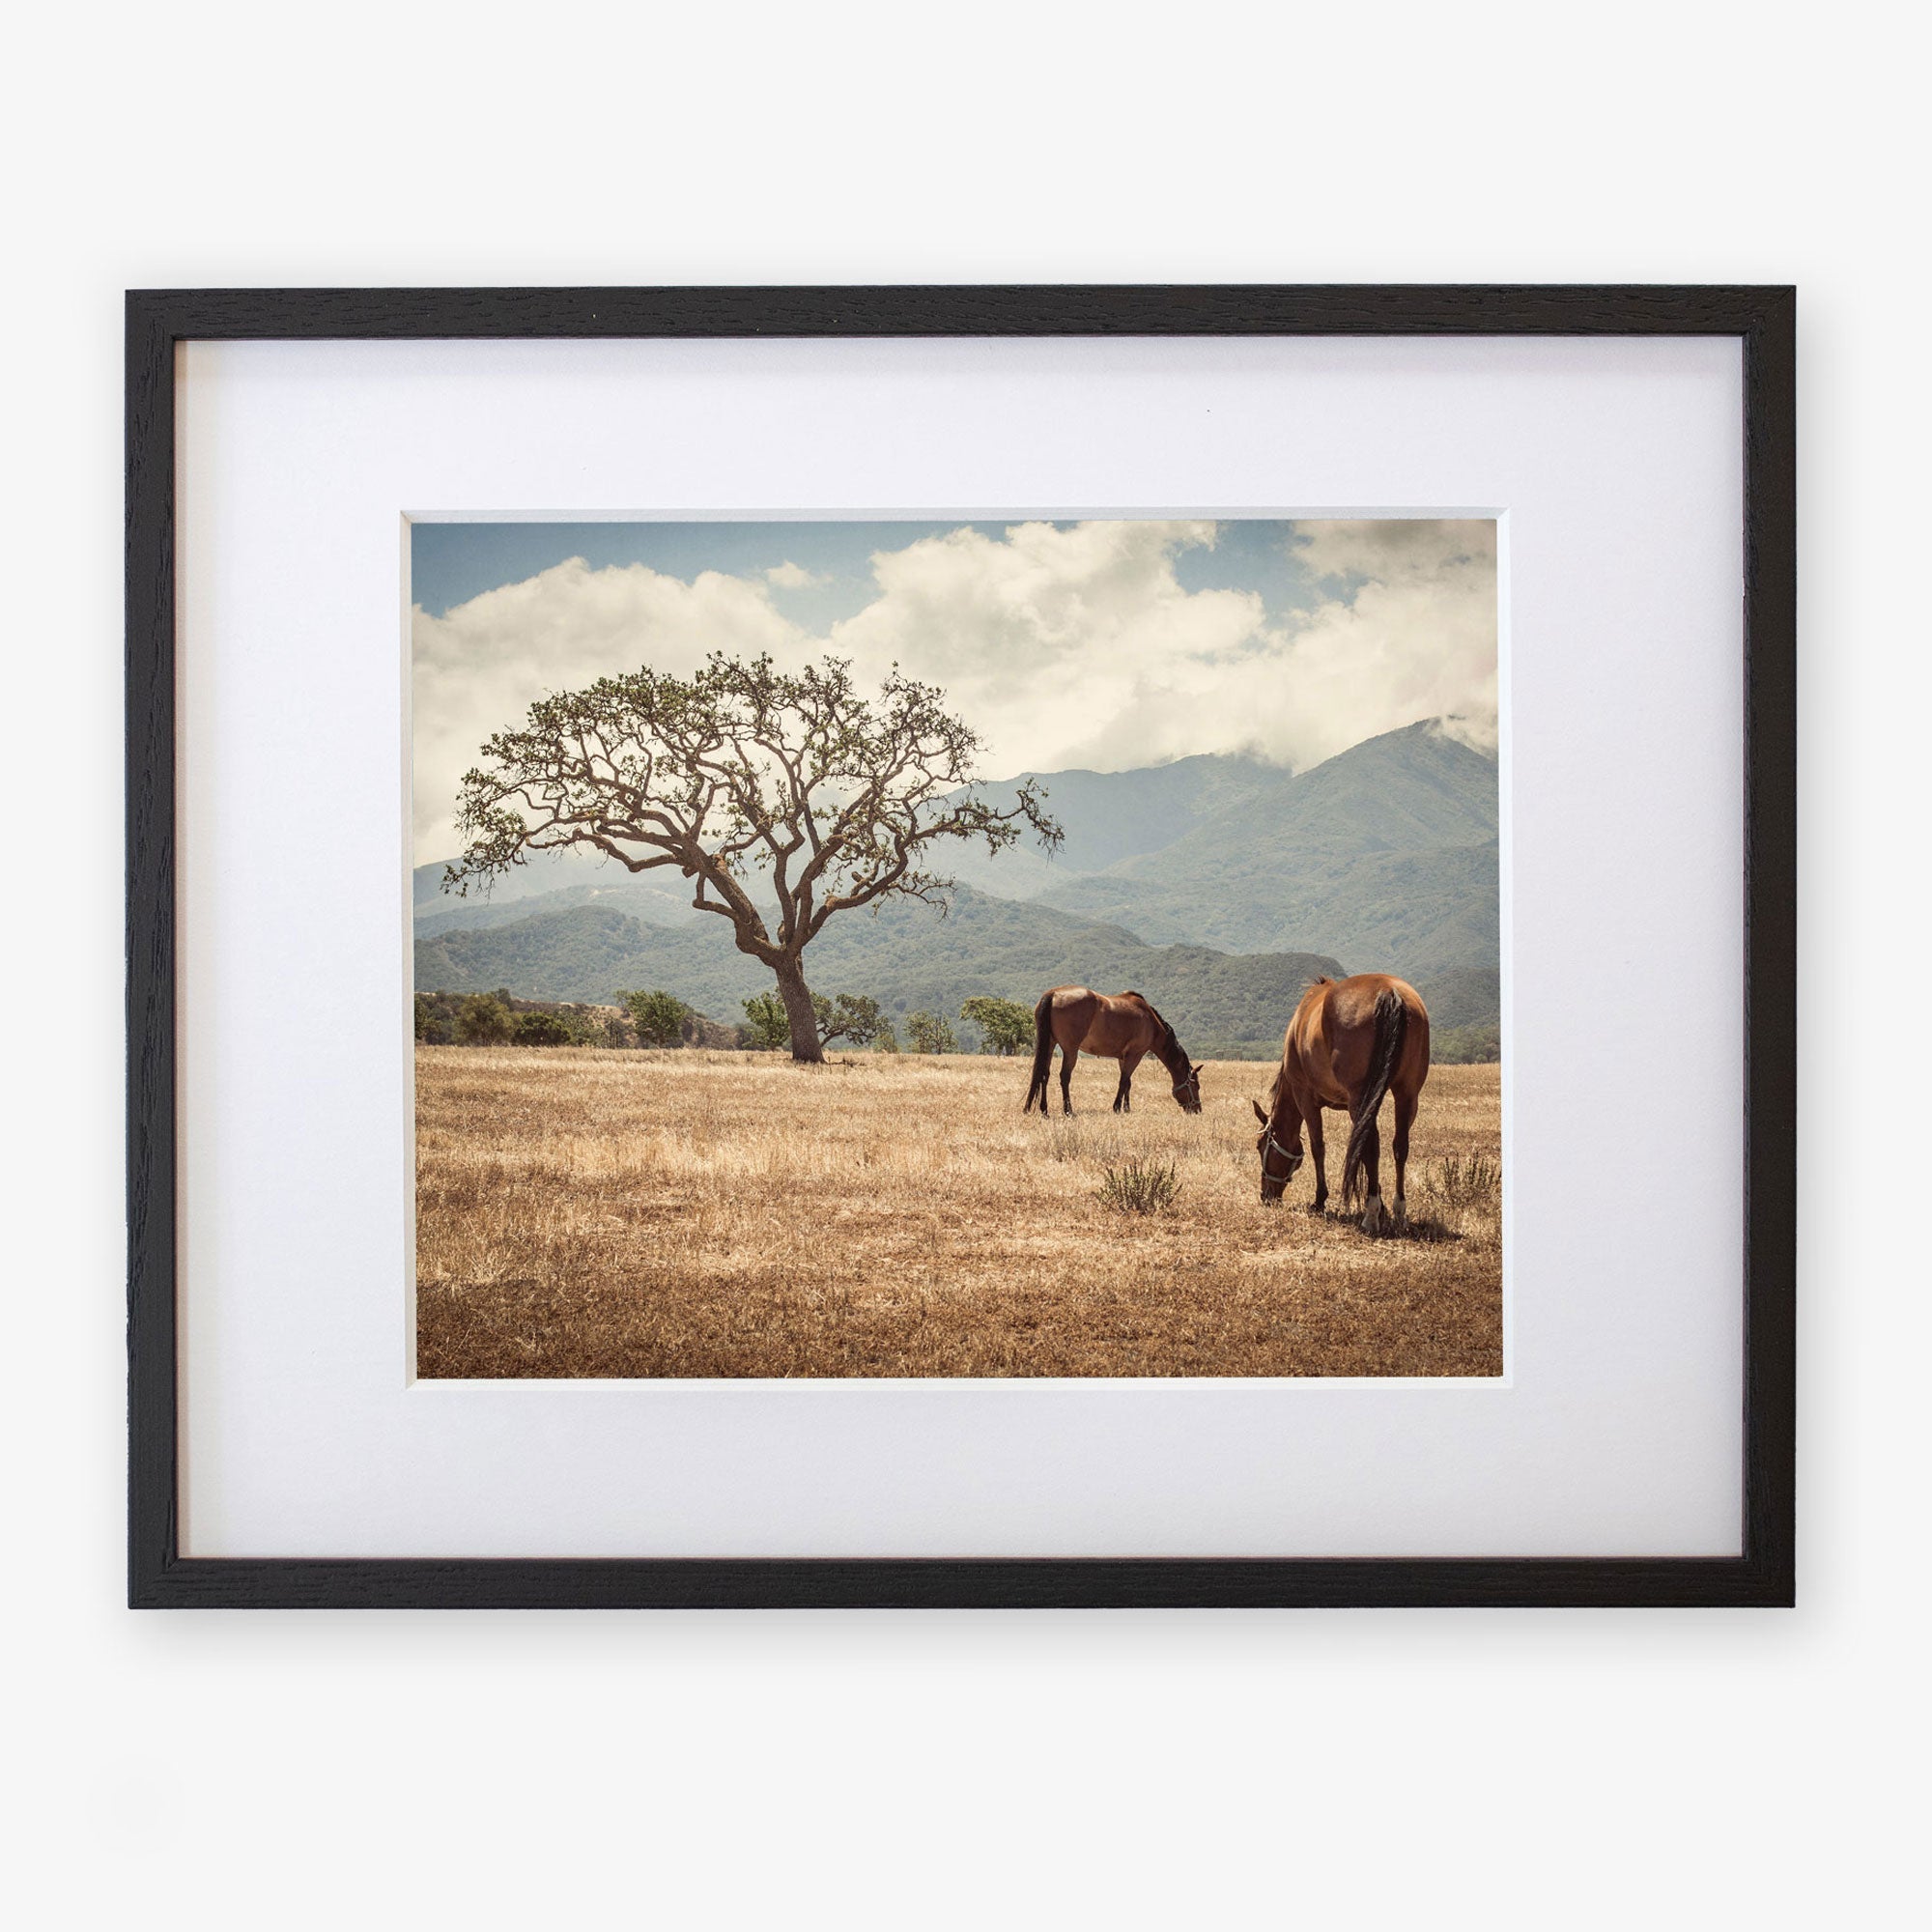 Framed rustic print of two horses grazing under a large tree in a golden field in Santa Ynez Valley, with a mountain range in the background, &#39;Santa Ynez Horses&#39; by Offley Green.